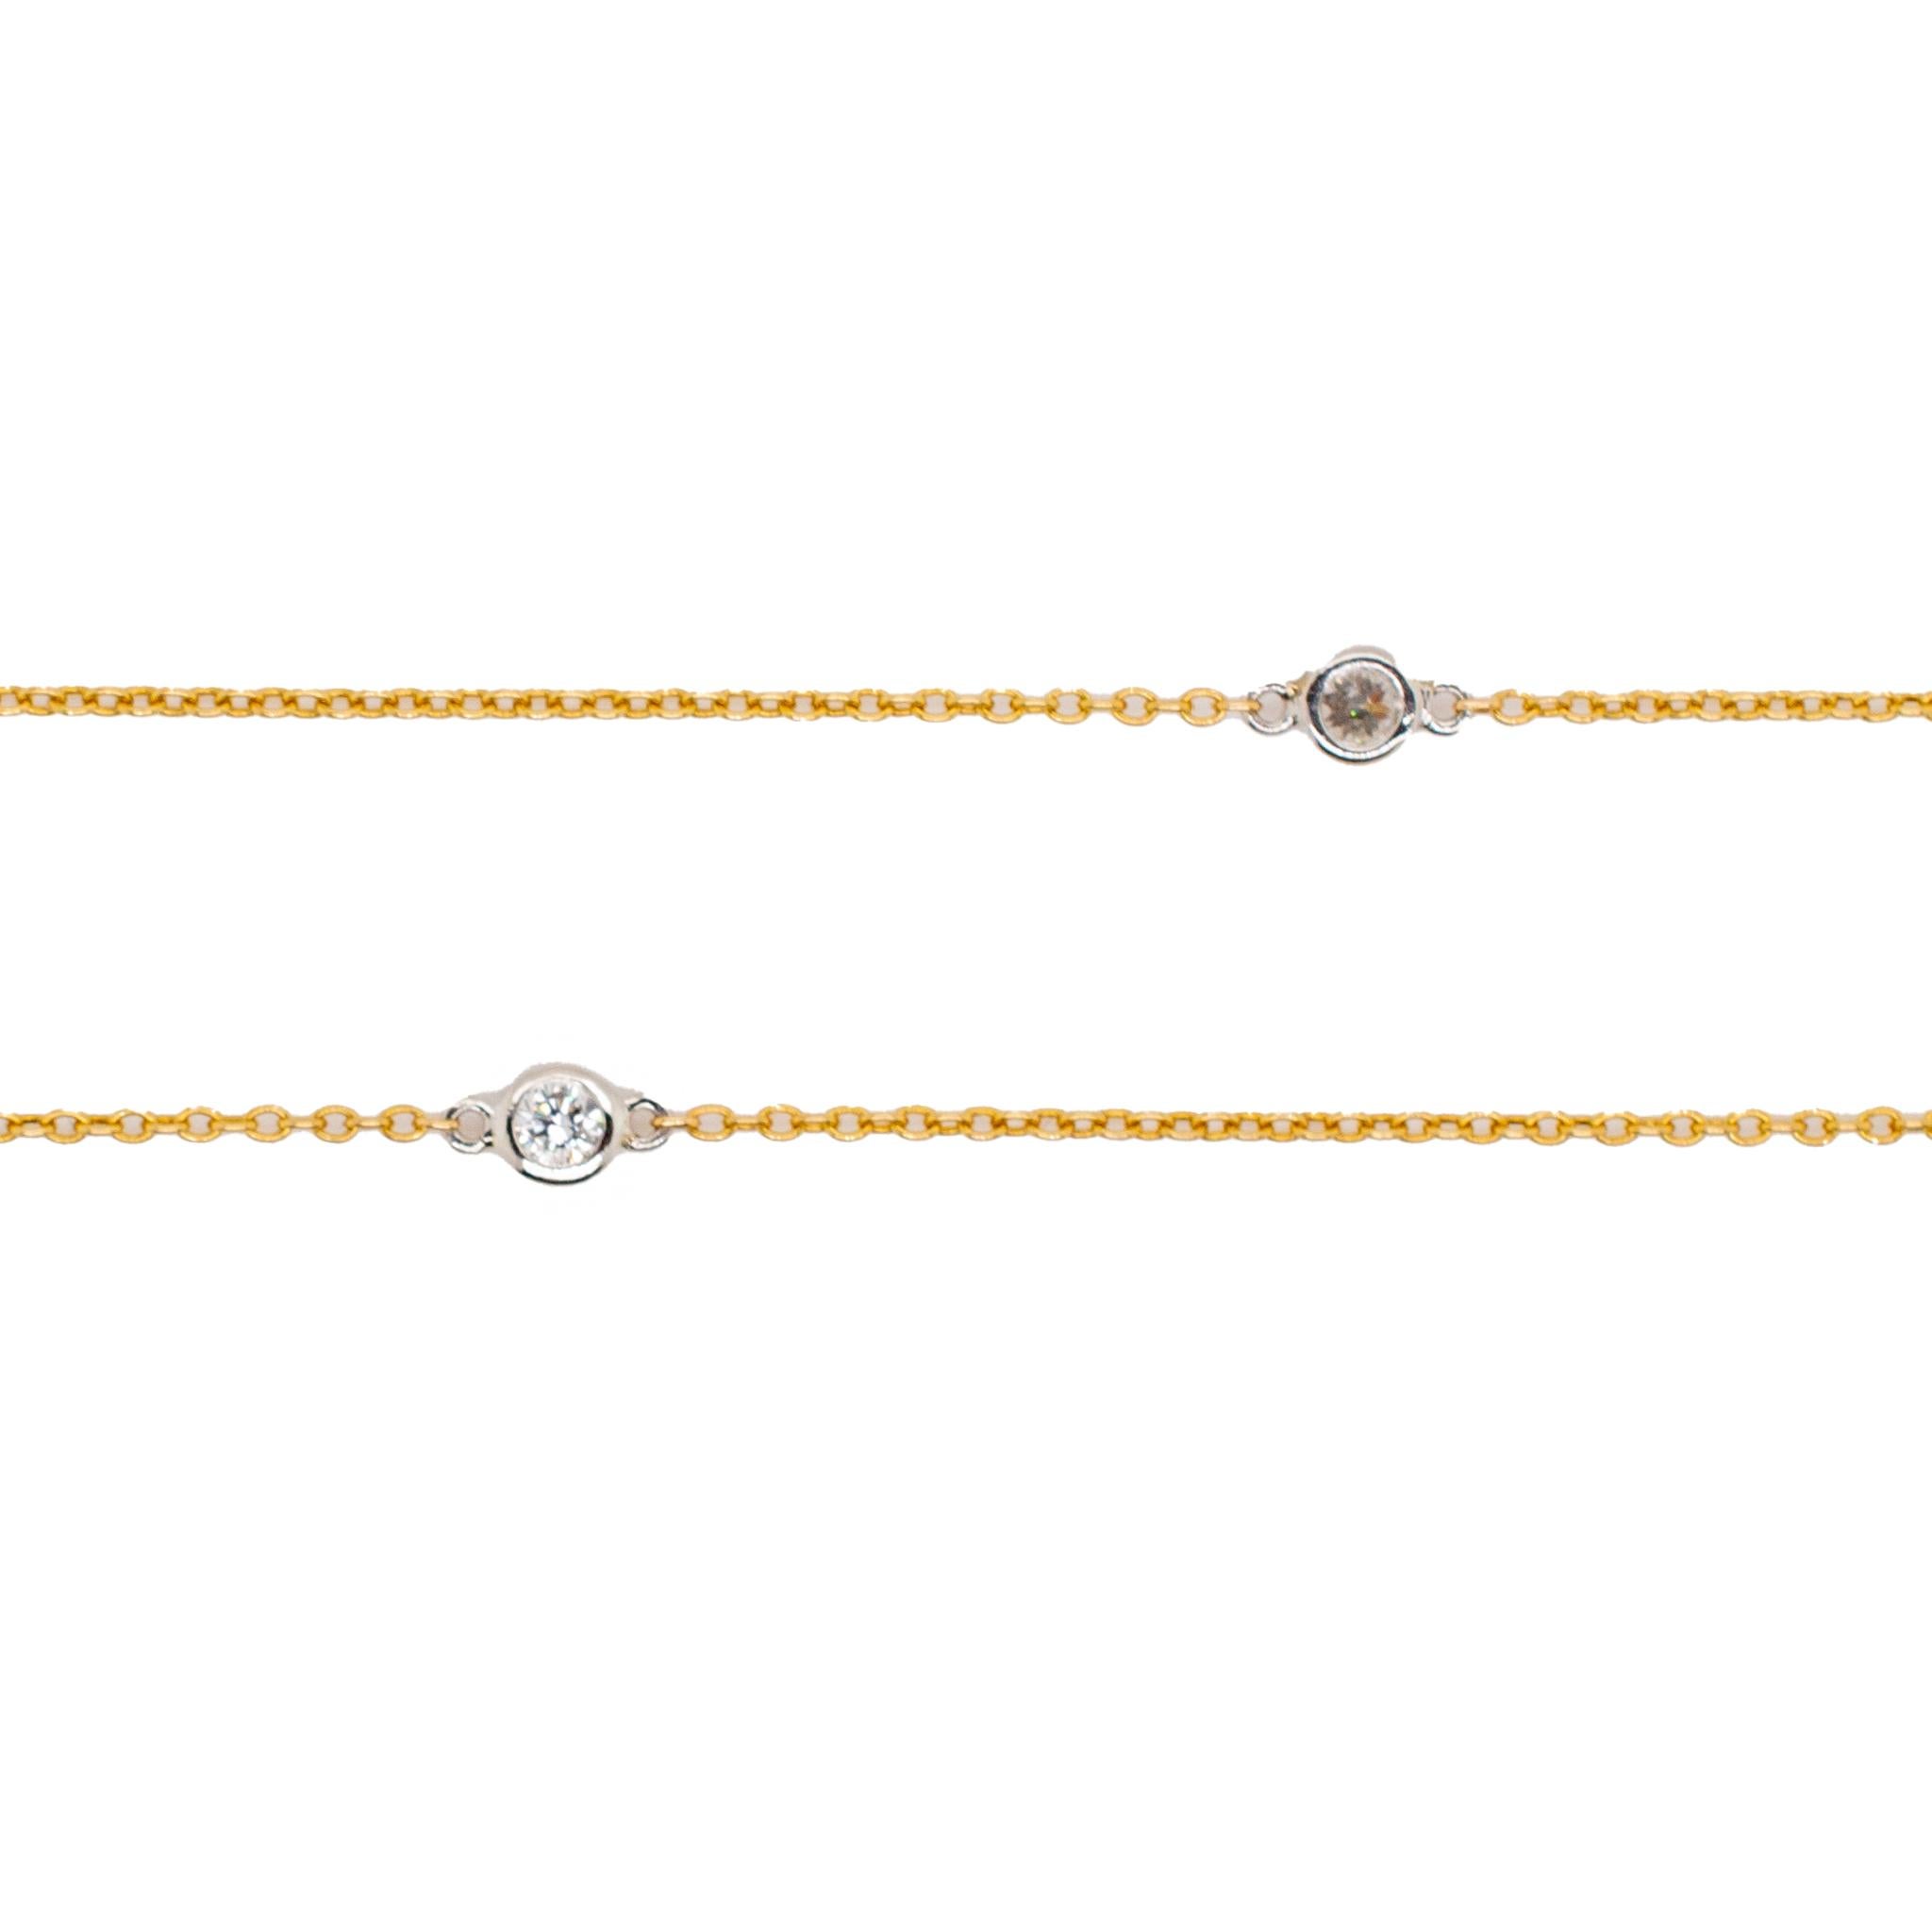 One lady's designer made polished, filigree-style, platinum and 18K yellow gold single strand opera, diamond station necklace. The necklace measures approximately 40.00 inches in length by 3.20mm tapering to 1.30mm in width and weighs a total of